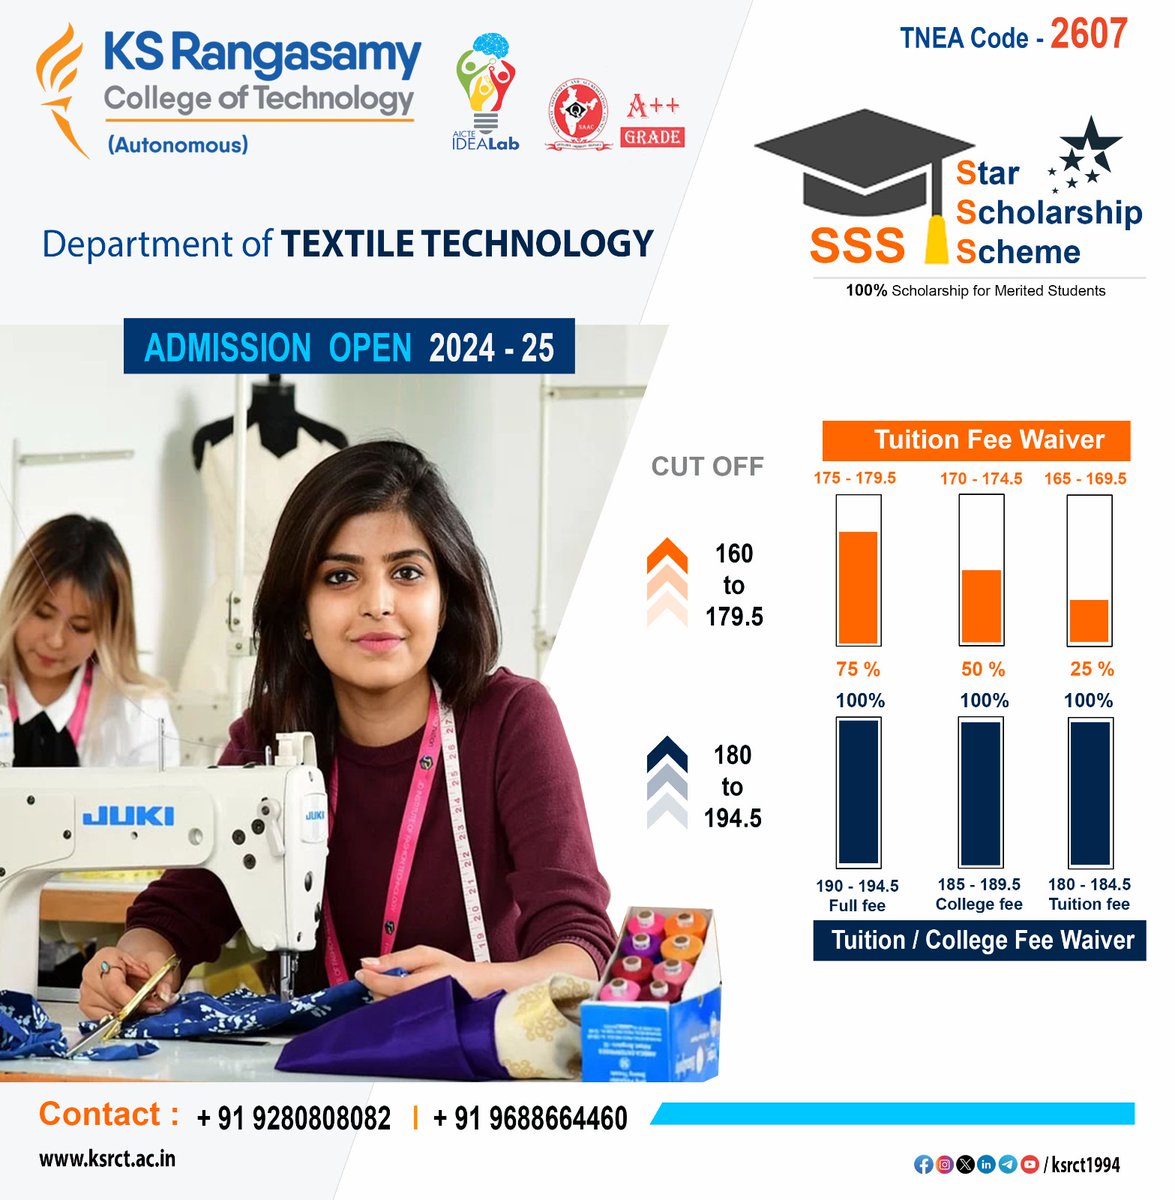 #ksrct1994 offers #Star Scholarship Scheme (SSS) to recognize and reward exceptional students who demonstrate academic excellence and a keen interest in Textile Technology.